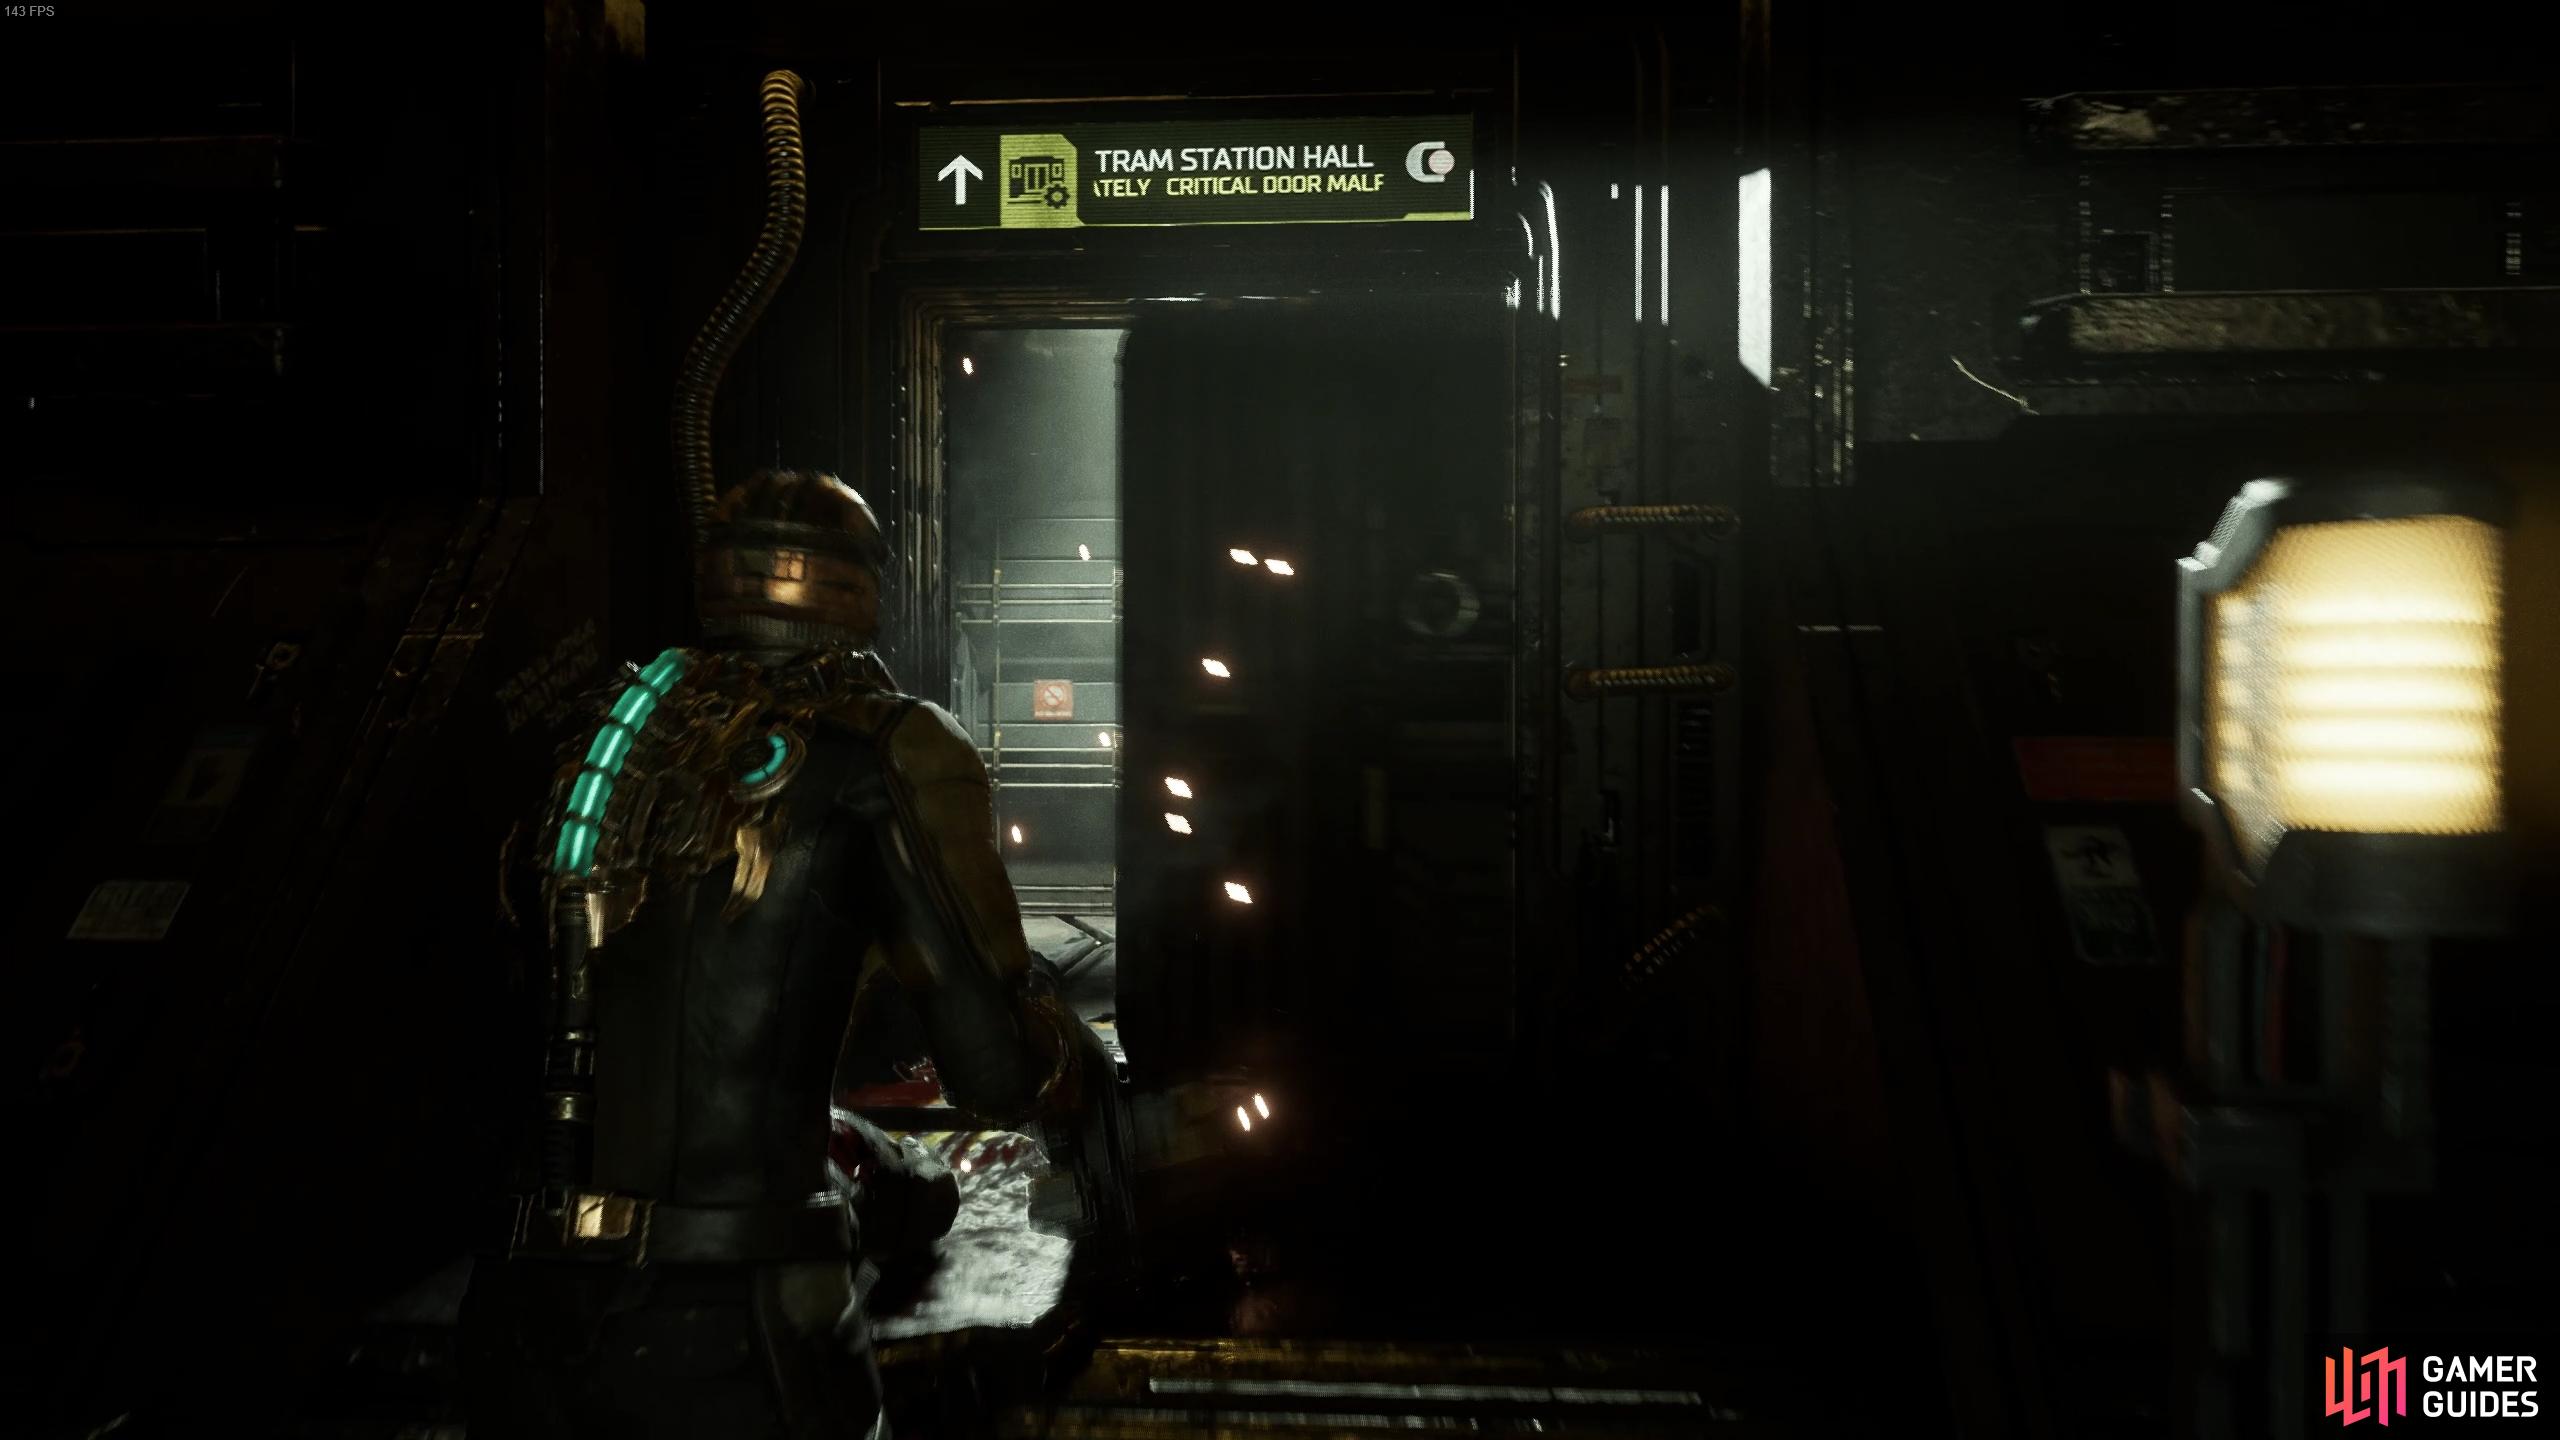 The Stasis Door log will trigger once you’ve acquired the Stasis Module to slow down the malfunctioning door.